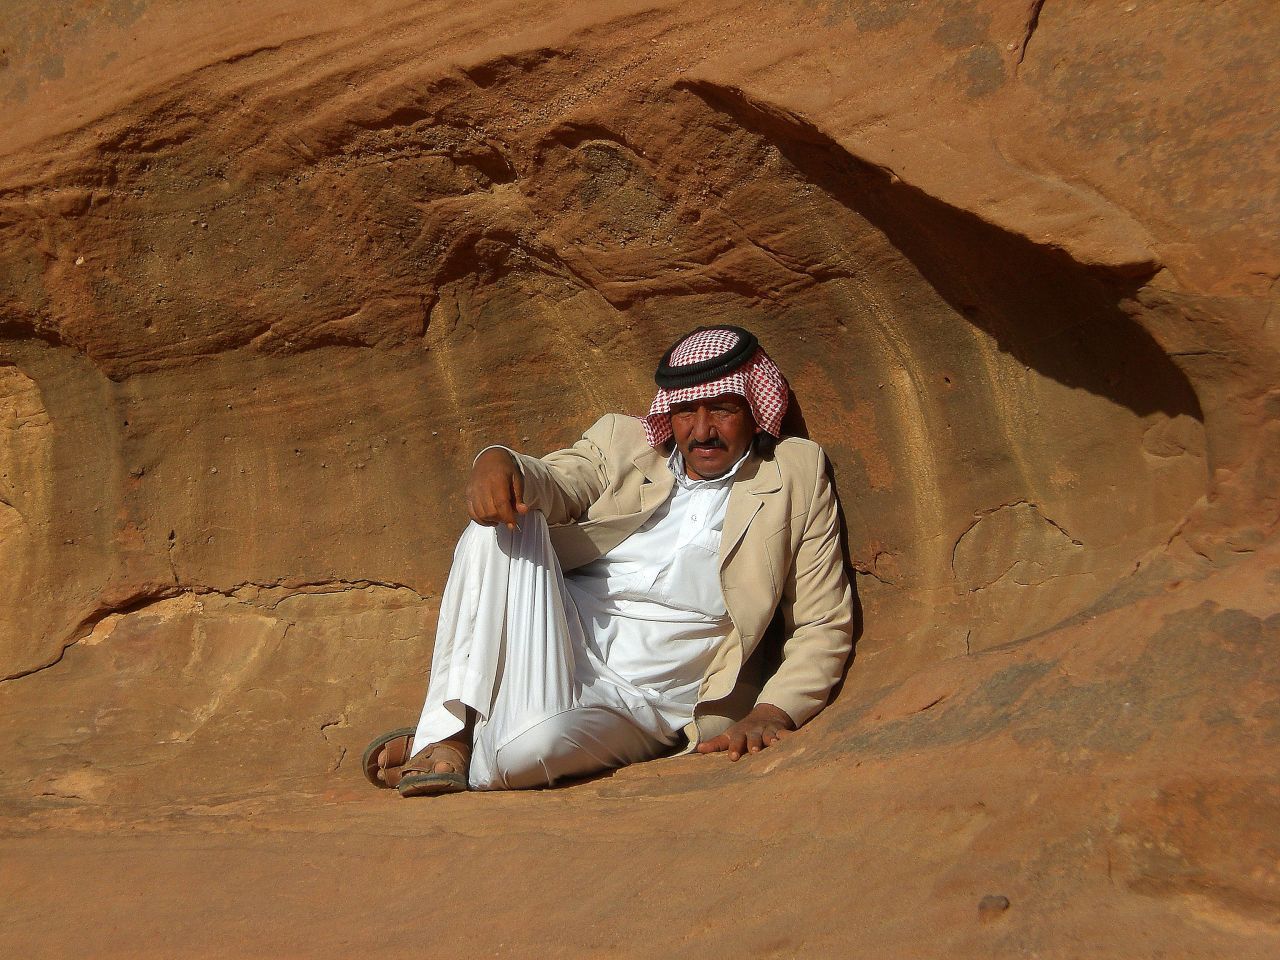 Bedouin culture is at the root of Jordanian hospitality. Ahlan wa Sahlan ("hello and welcome") follows you wherever you go. Hospitality is part of life, founded in a centuries-old nomadic culture.